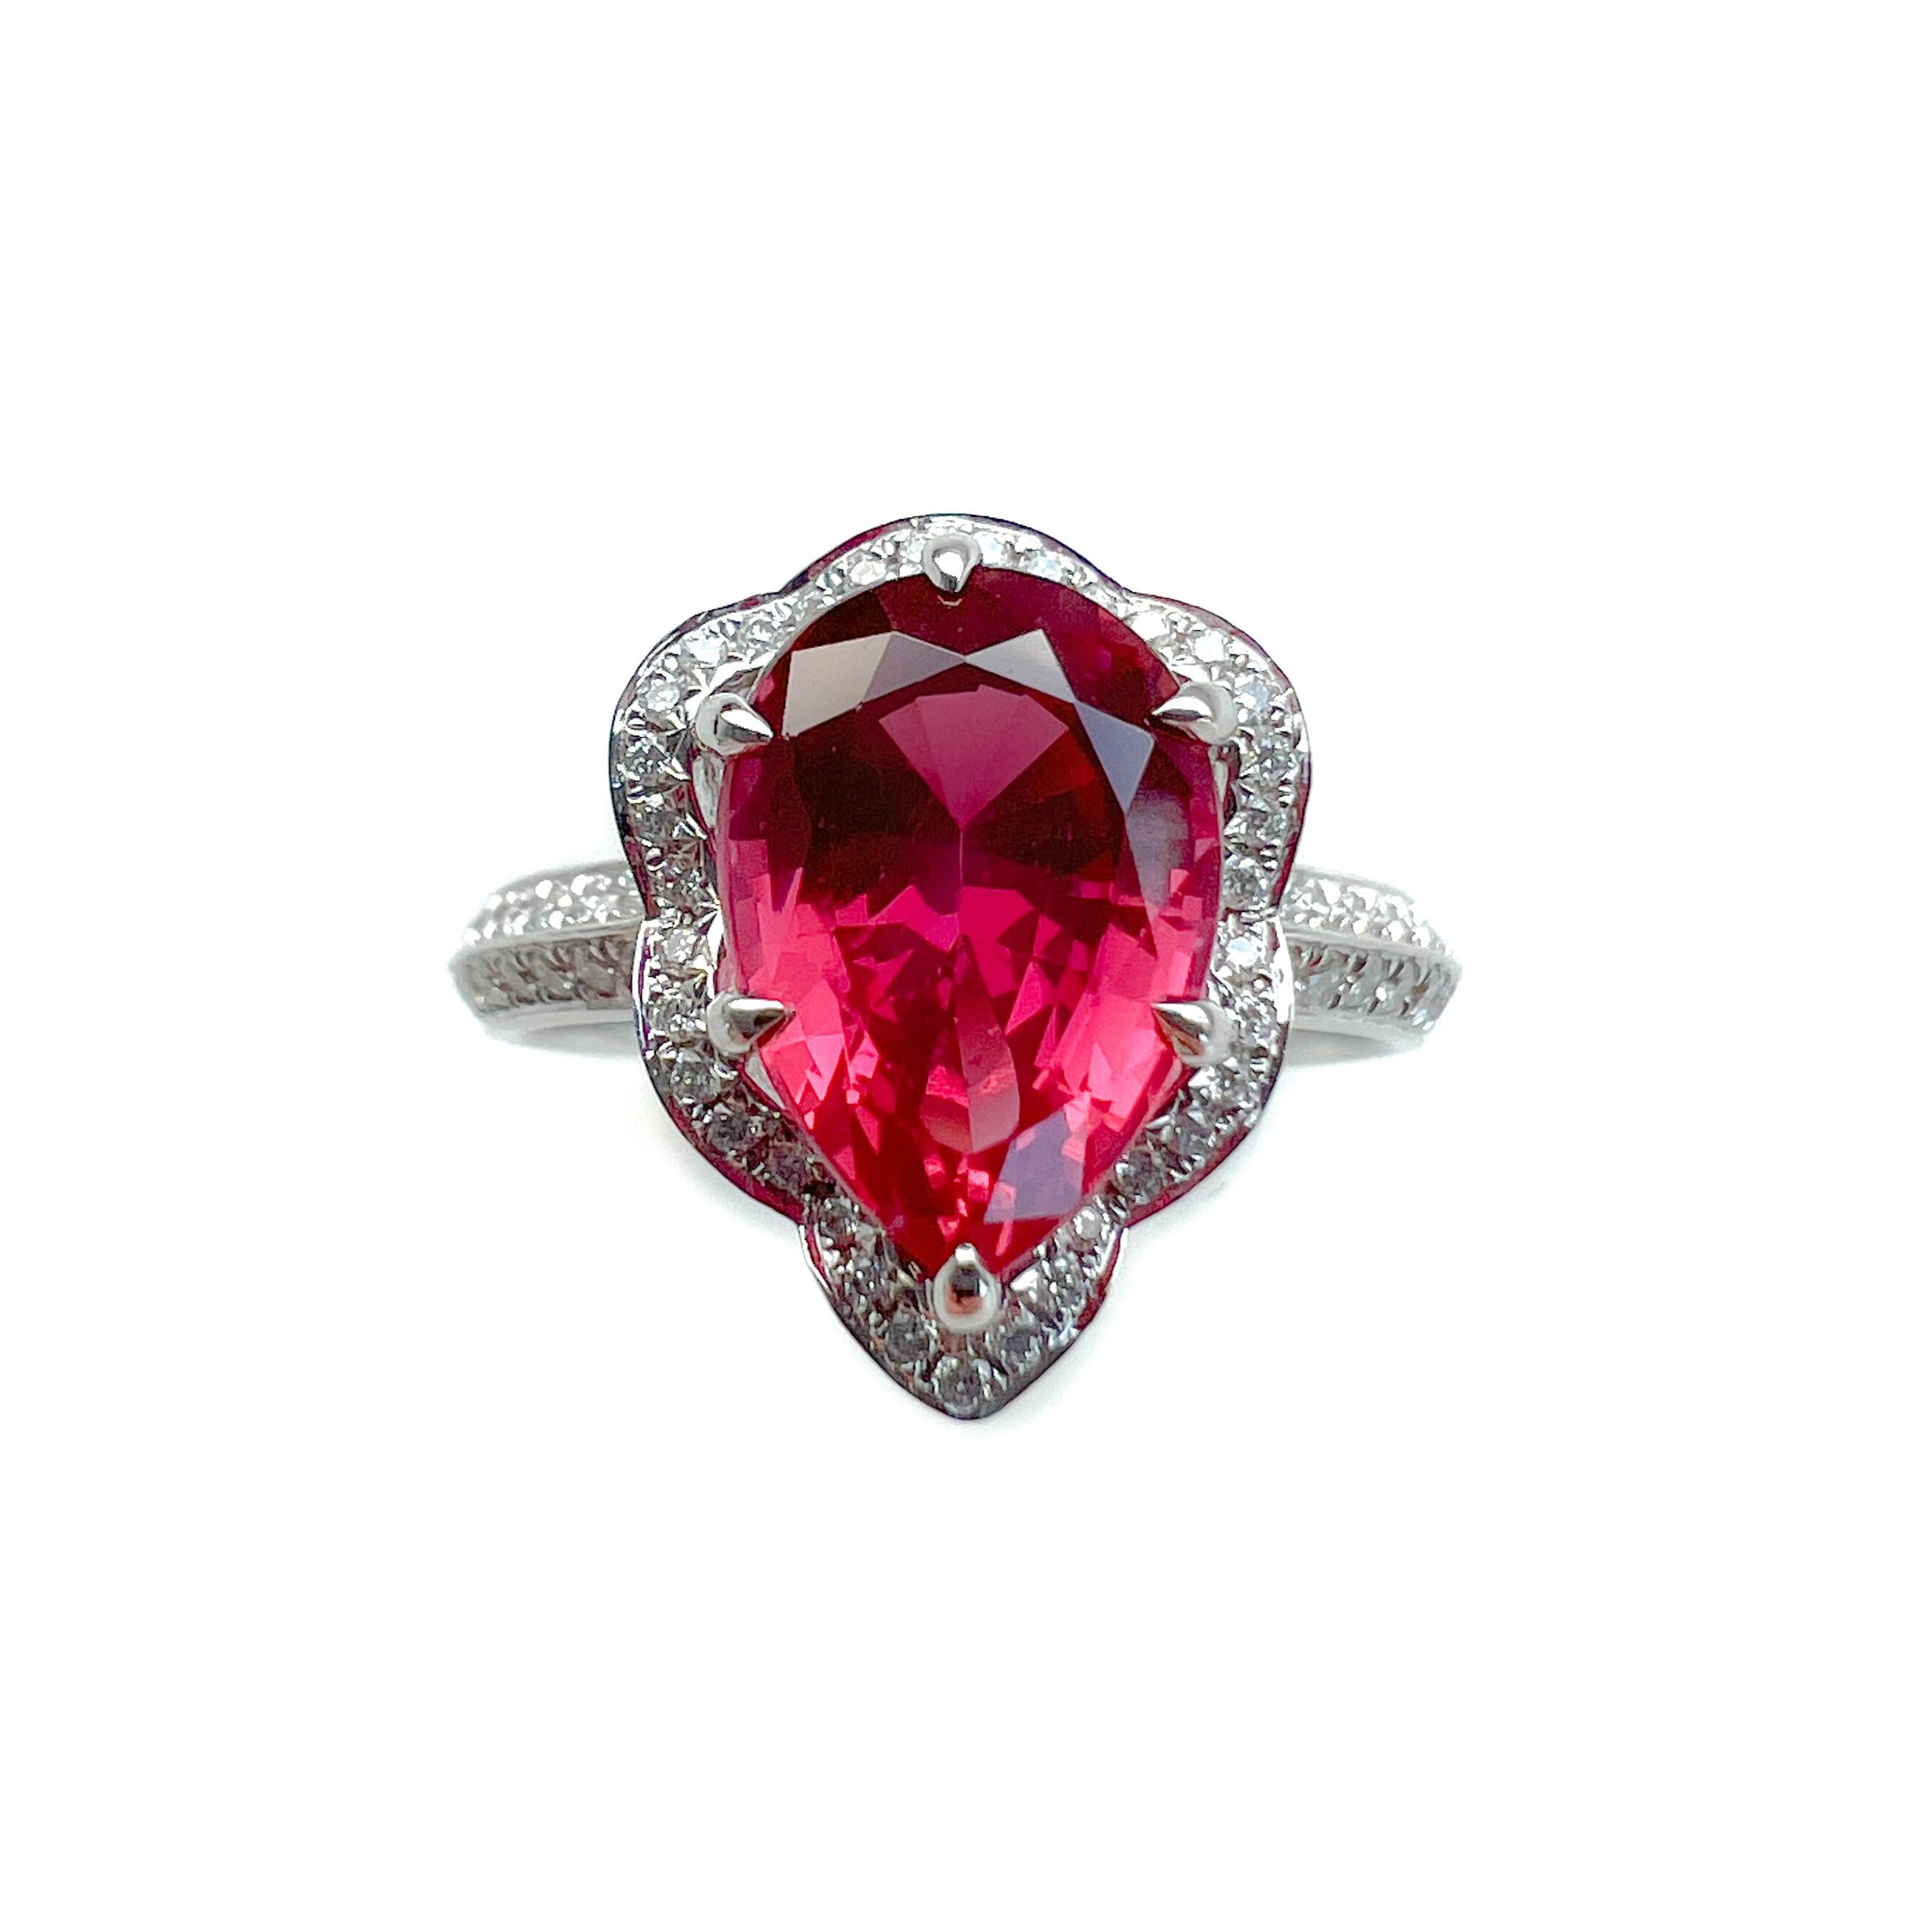 The beautiful loose Spinel was purchased by us in 2022 and made into this ring. We believe the Spinel was previously set in an antique ring but we do not have any info on its history. A reimagined heirloom. Would also make an incredibly unique